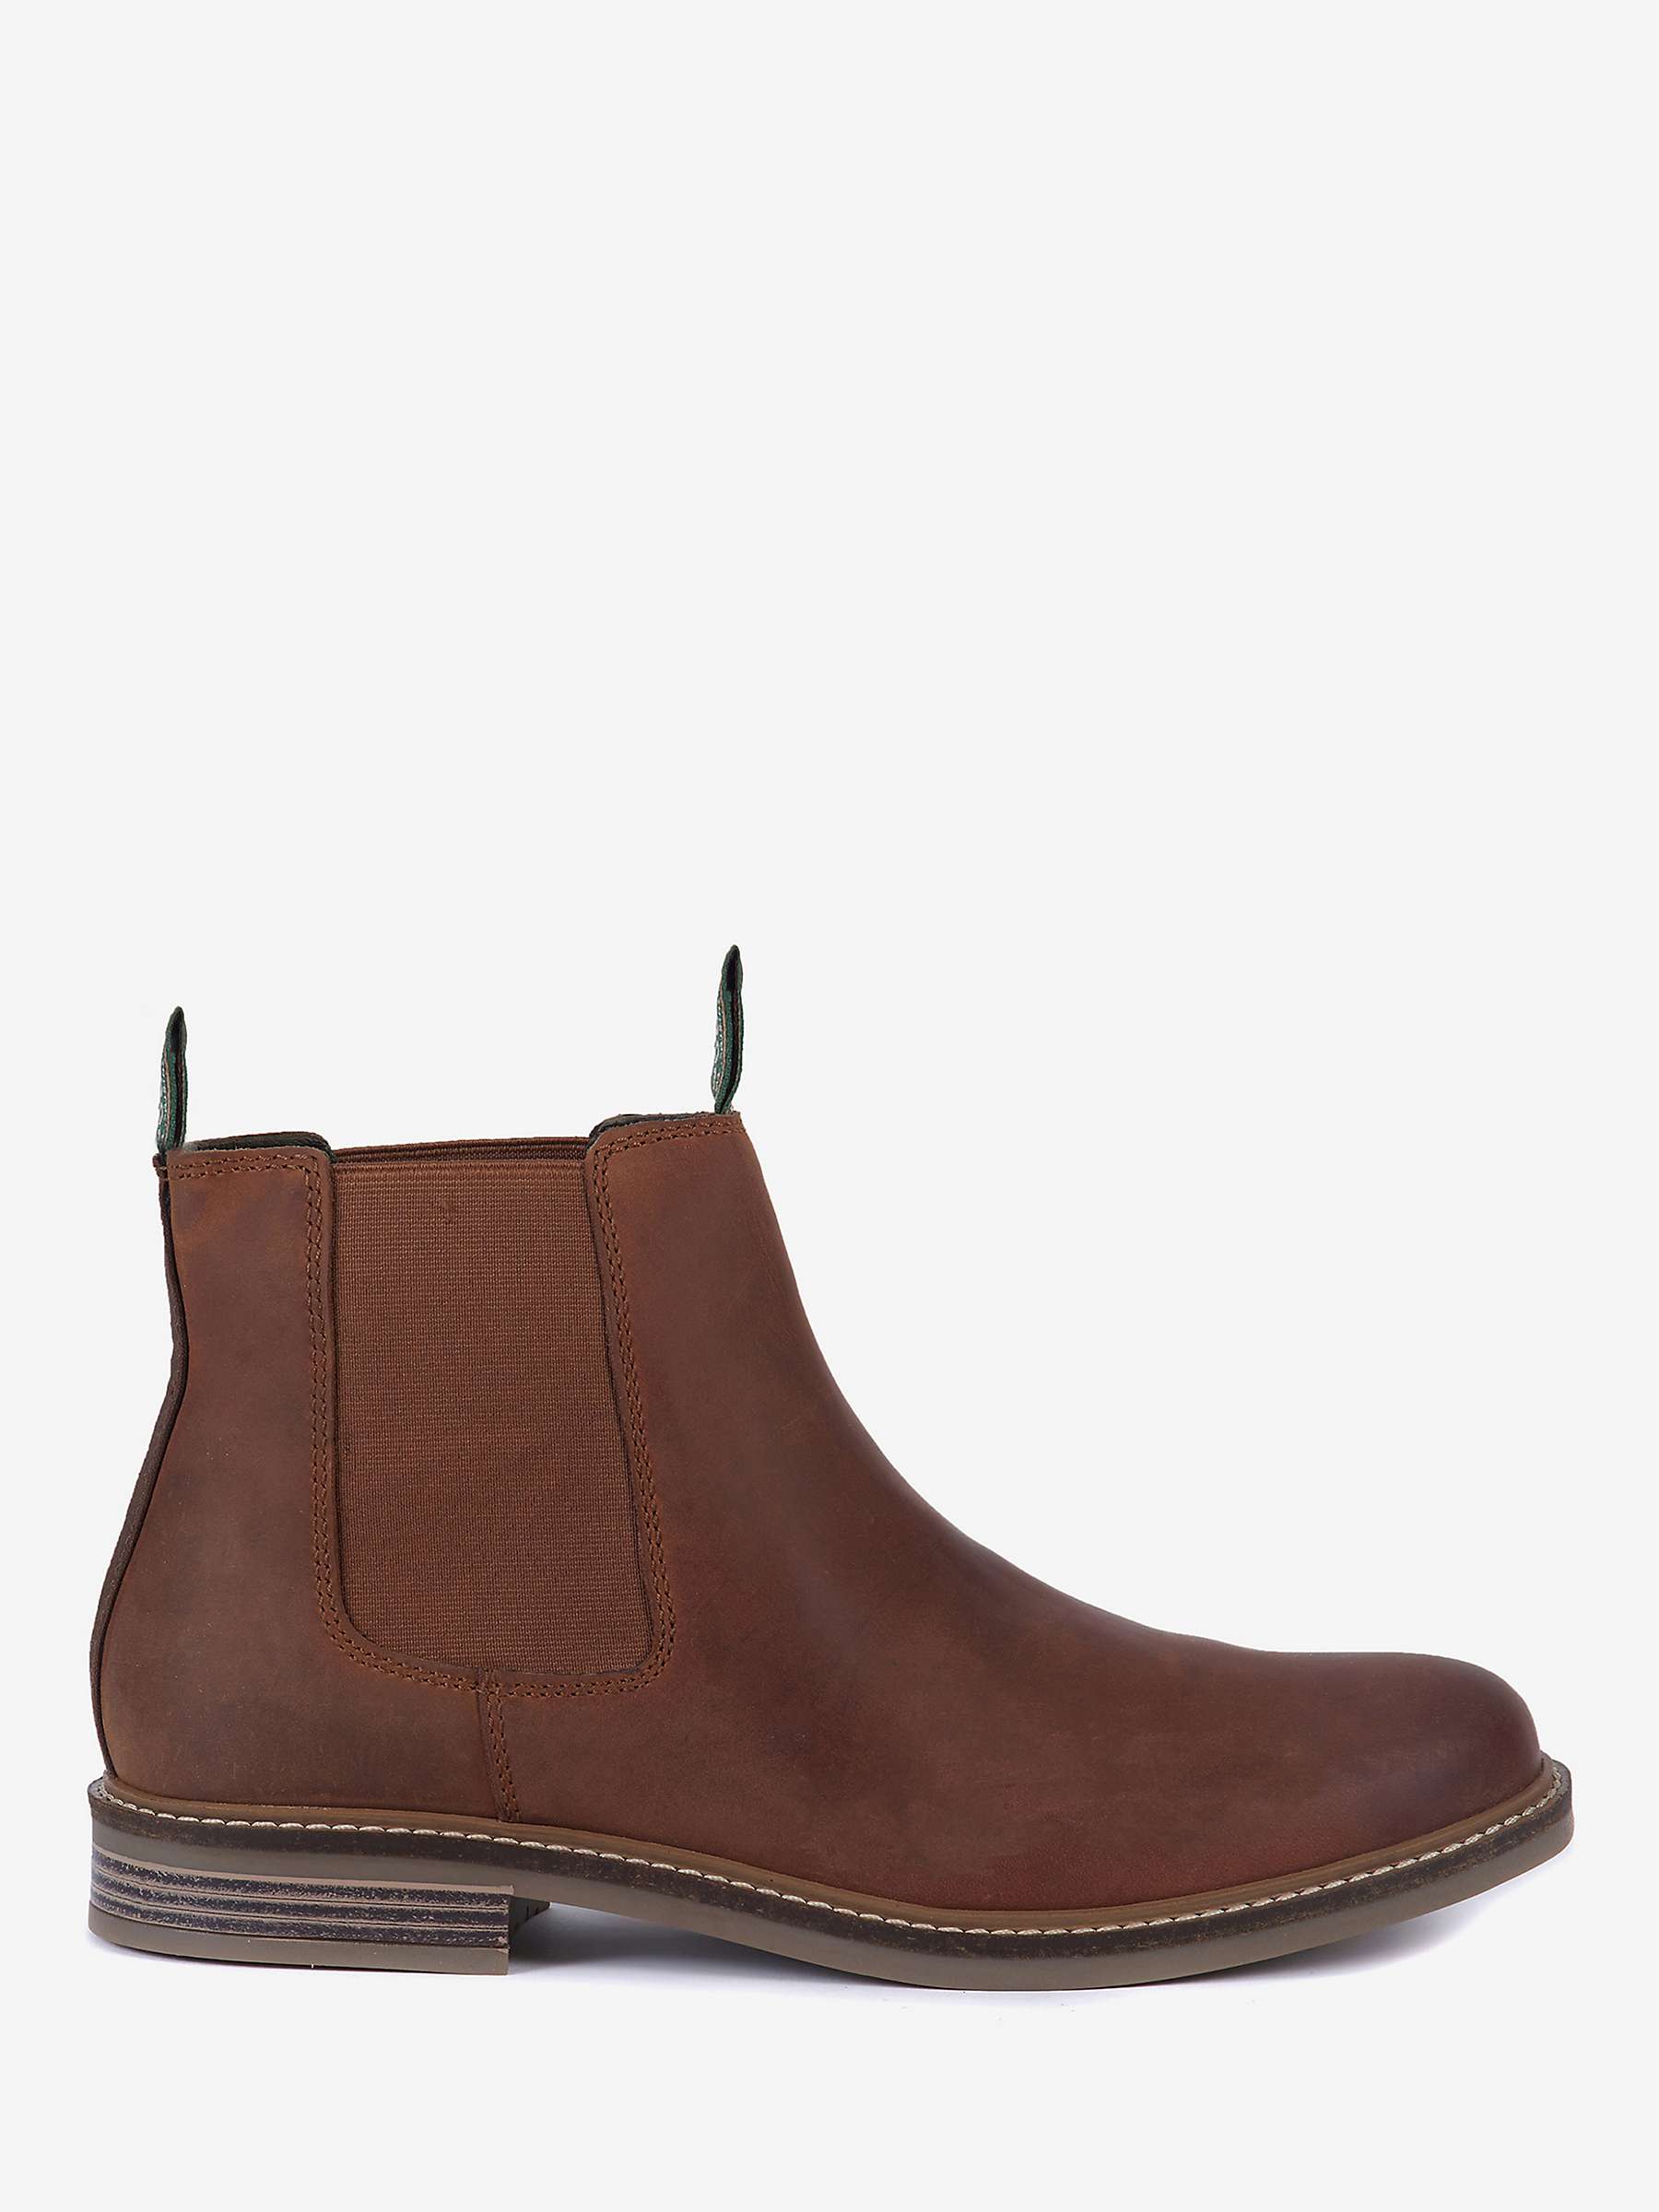 Buy Barbour Farsley Slip On Boots, Brown Online at johnlewis.com